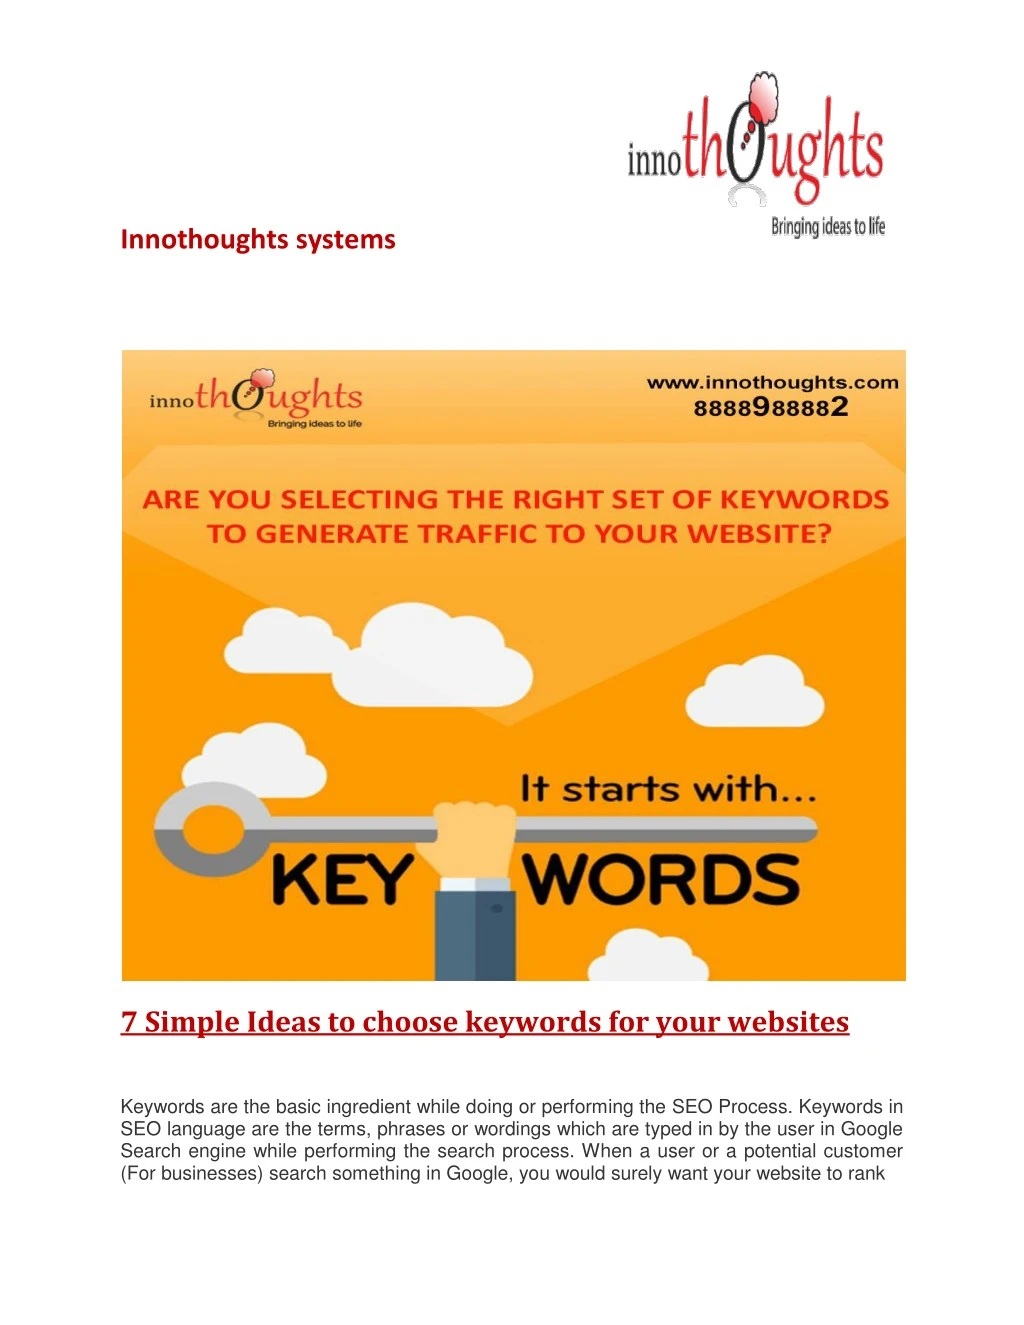 innothoughts systems blogs